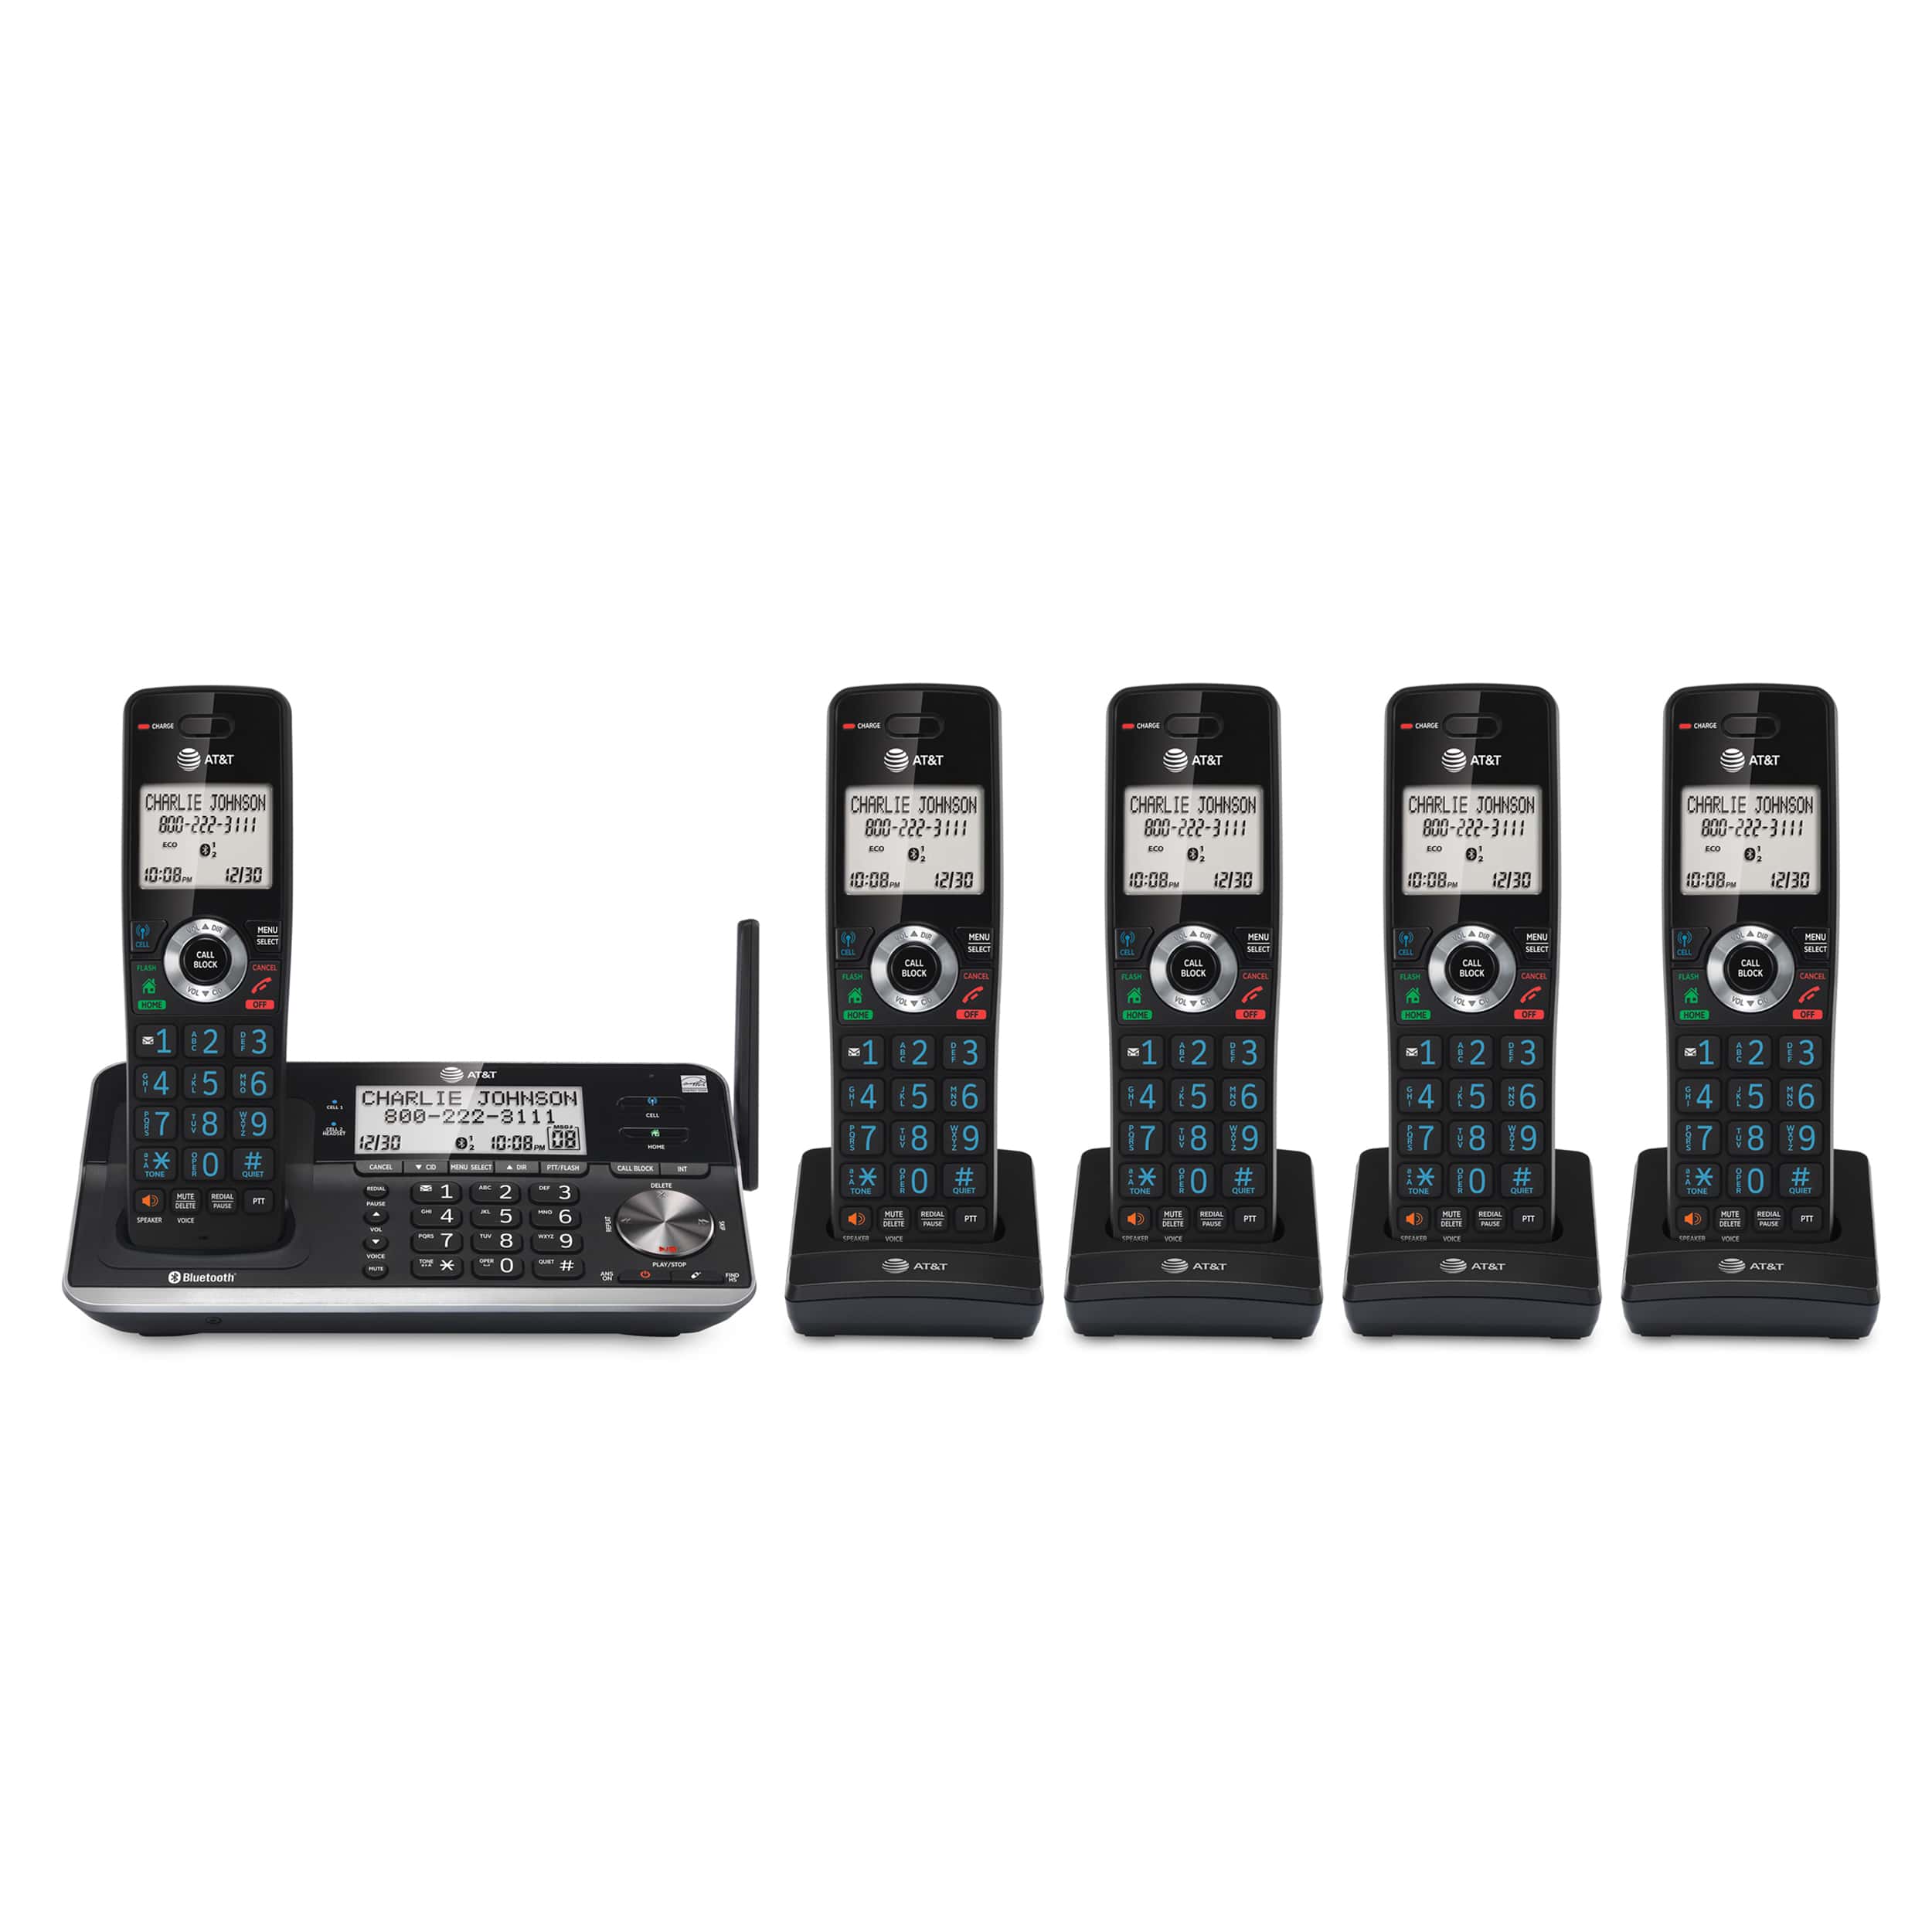 5-Handset Expandable Cordless Phone with Unsurpassed Range, Bluetooth Connect to Cell™, Smart Call Blocker and Answering System, DLP73510 - view 1